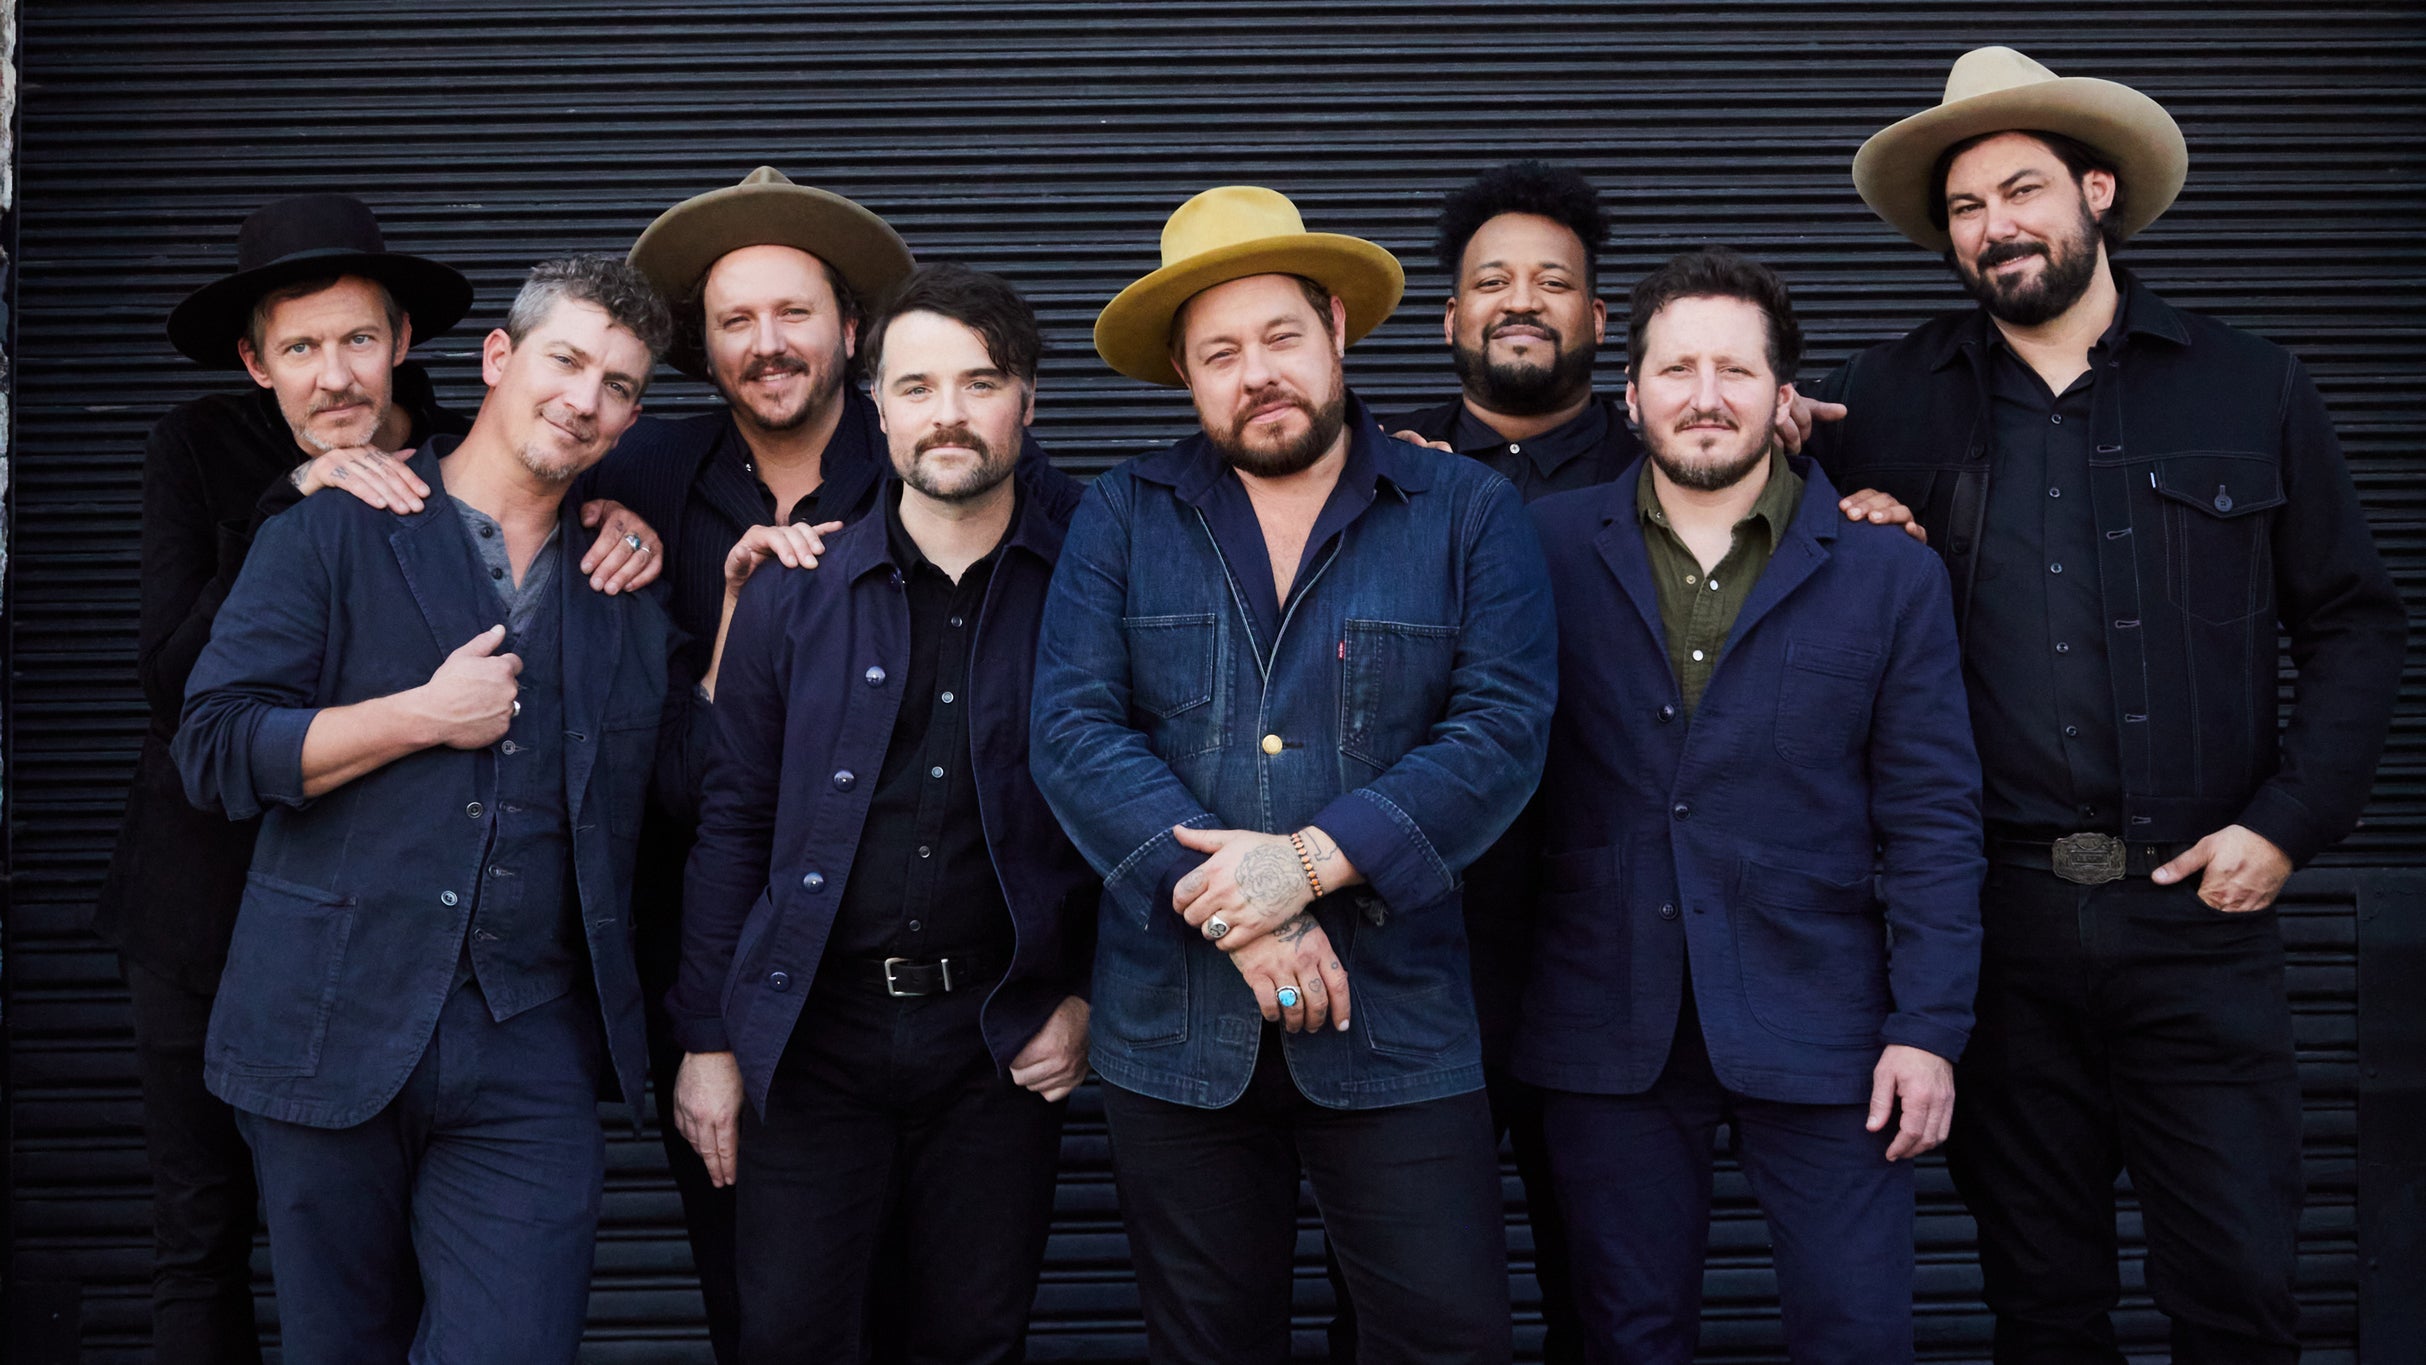 Eye To Eye Tour - Nathaniel Rateliff & TNS and My Morning Jacket presale code for event tickets in Syracuse, NY (Empower Federal Credit Union Amphitheater at Lakeview)